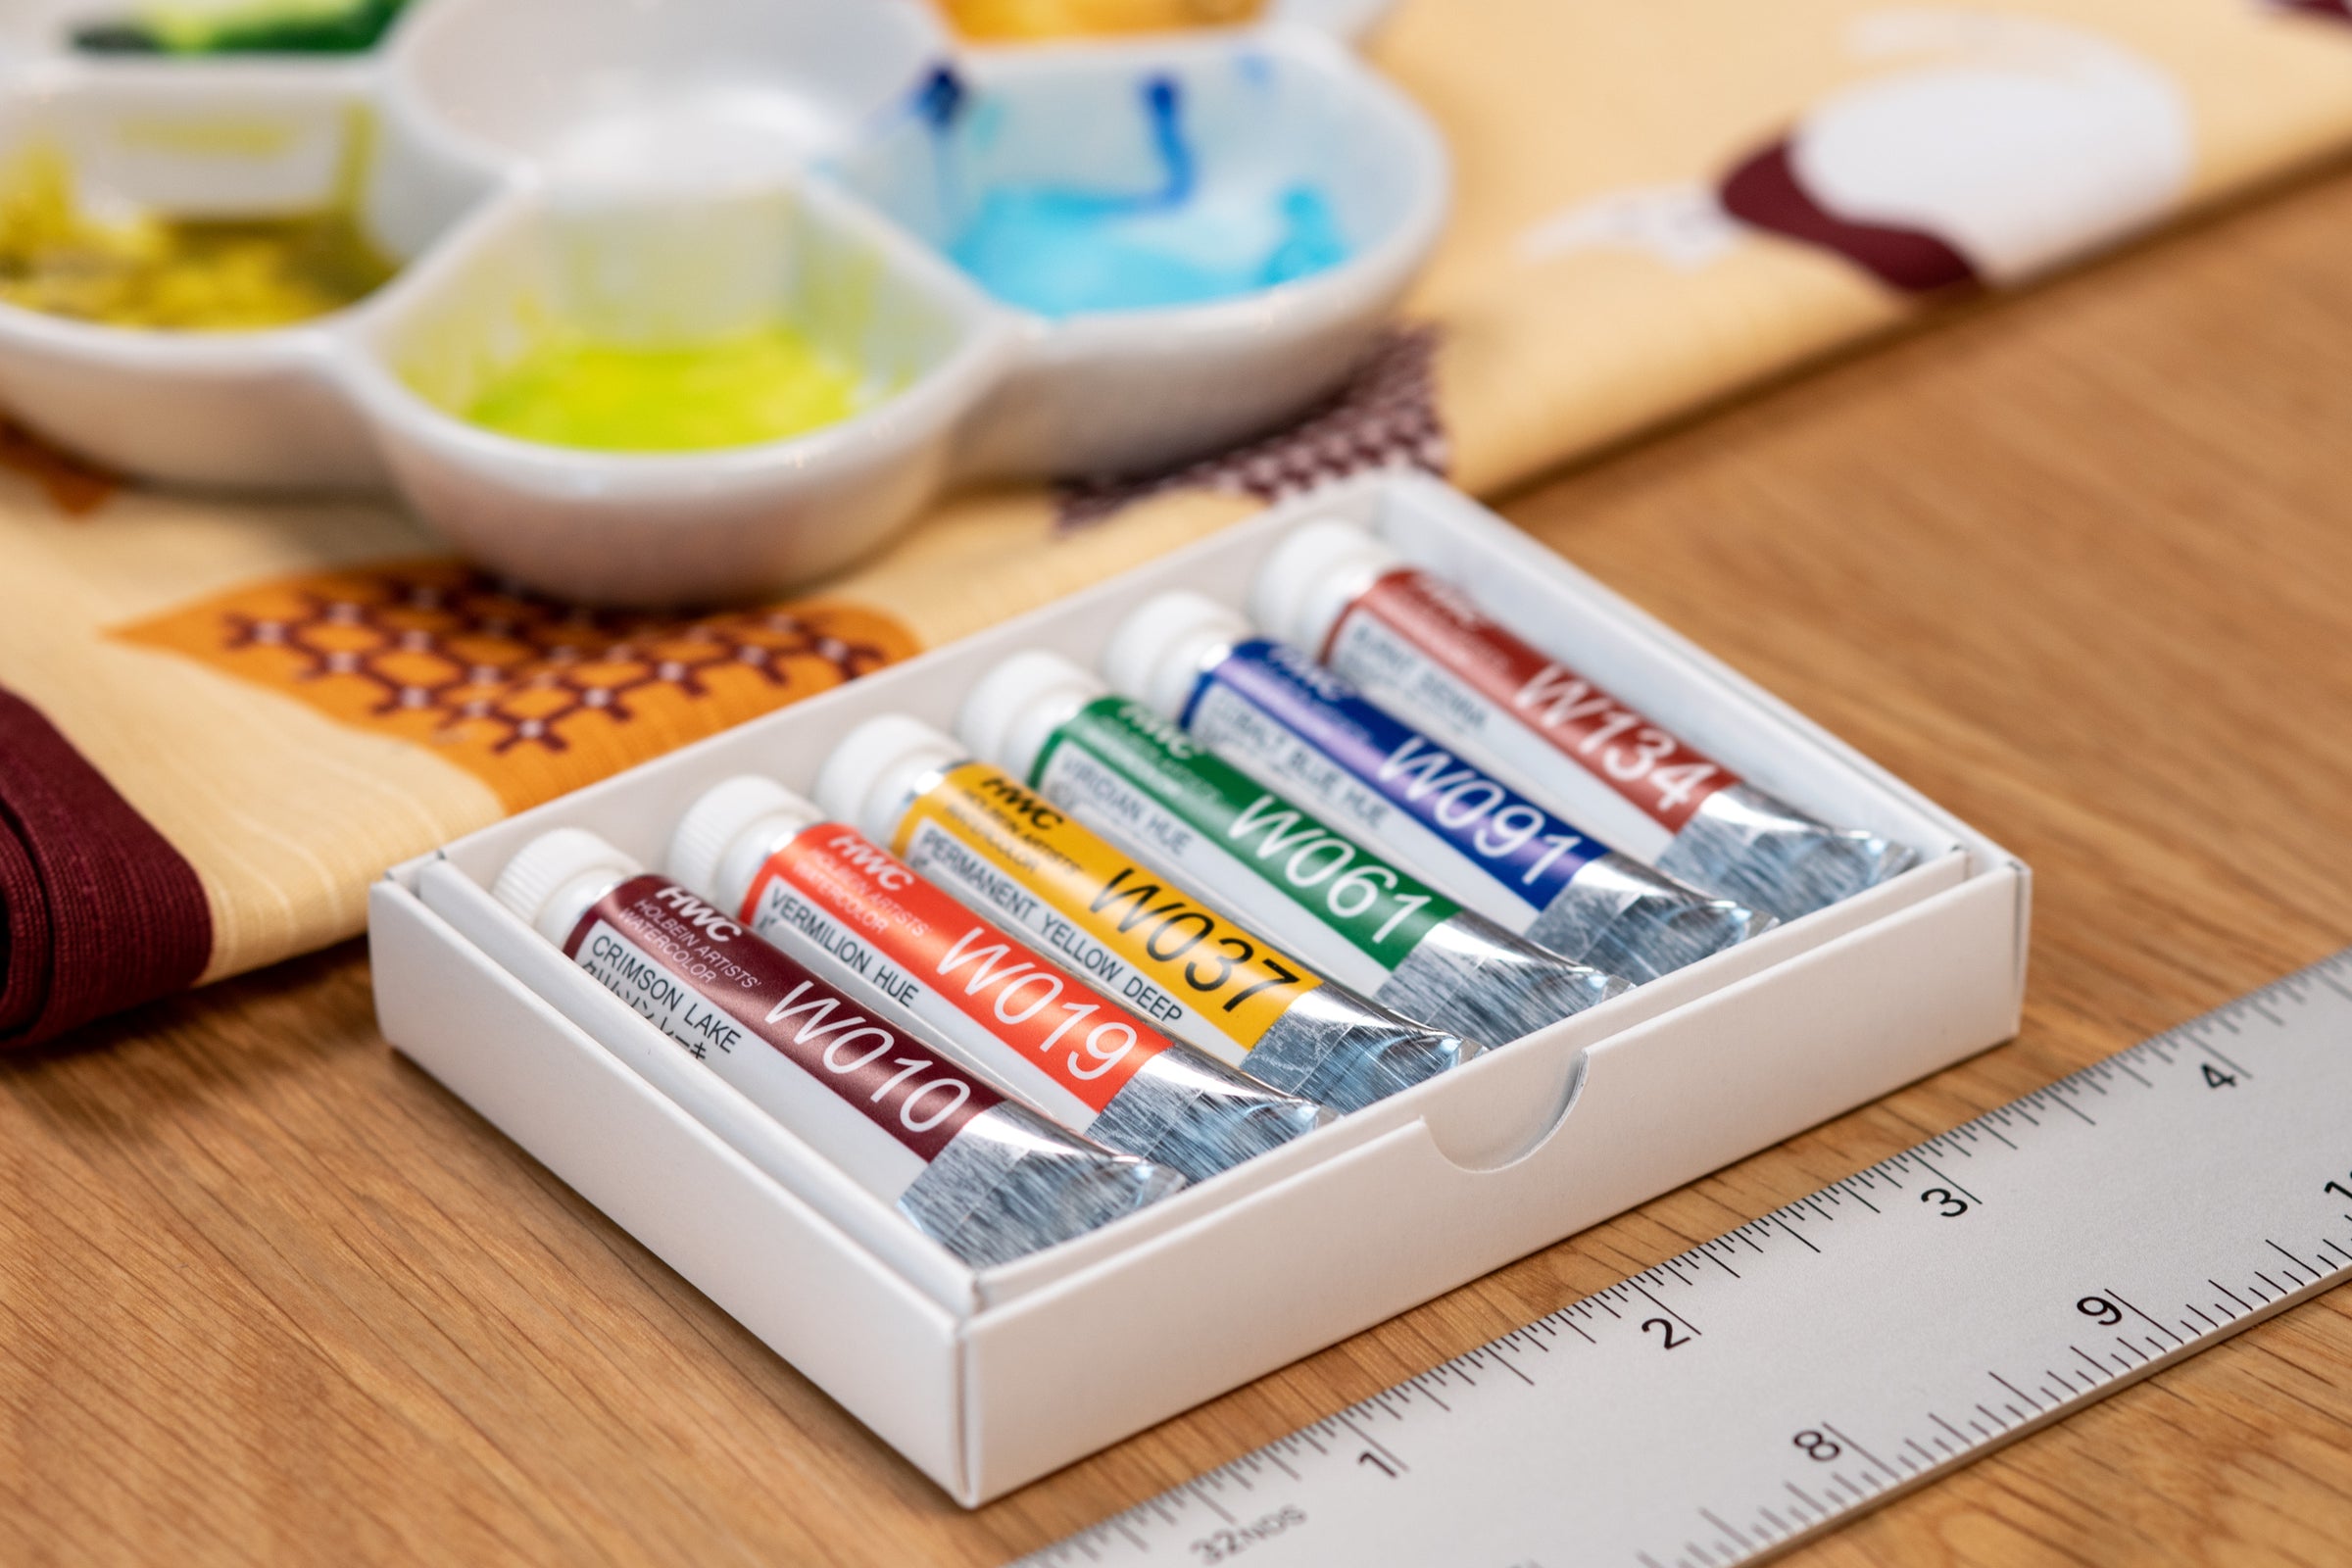 Holbein Watercolor Paint Set - Summer Neon Colors - Set of 6 Vibrant,  Happy, Cheerful Summer Colors! - WaterColourHoarder